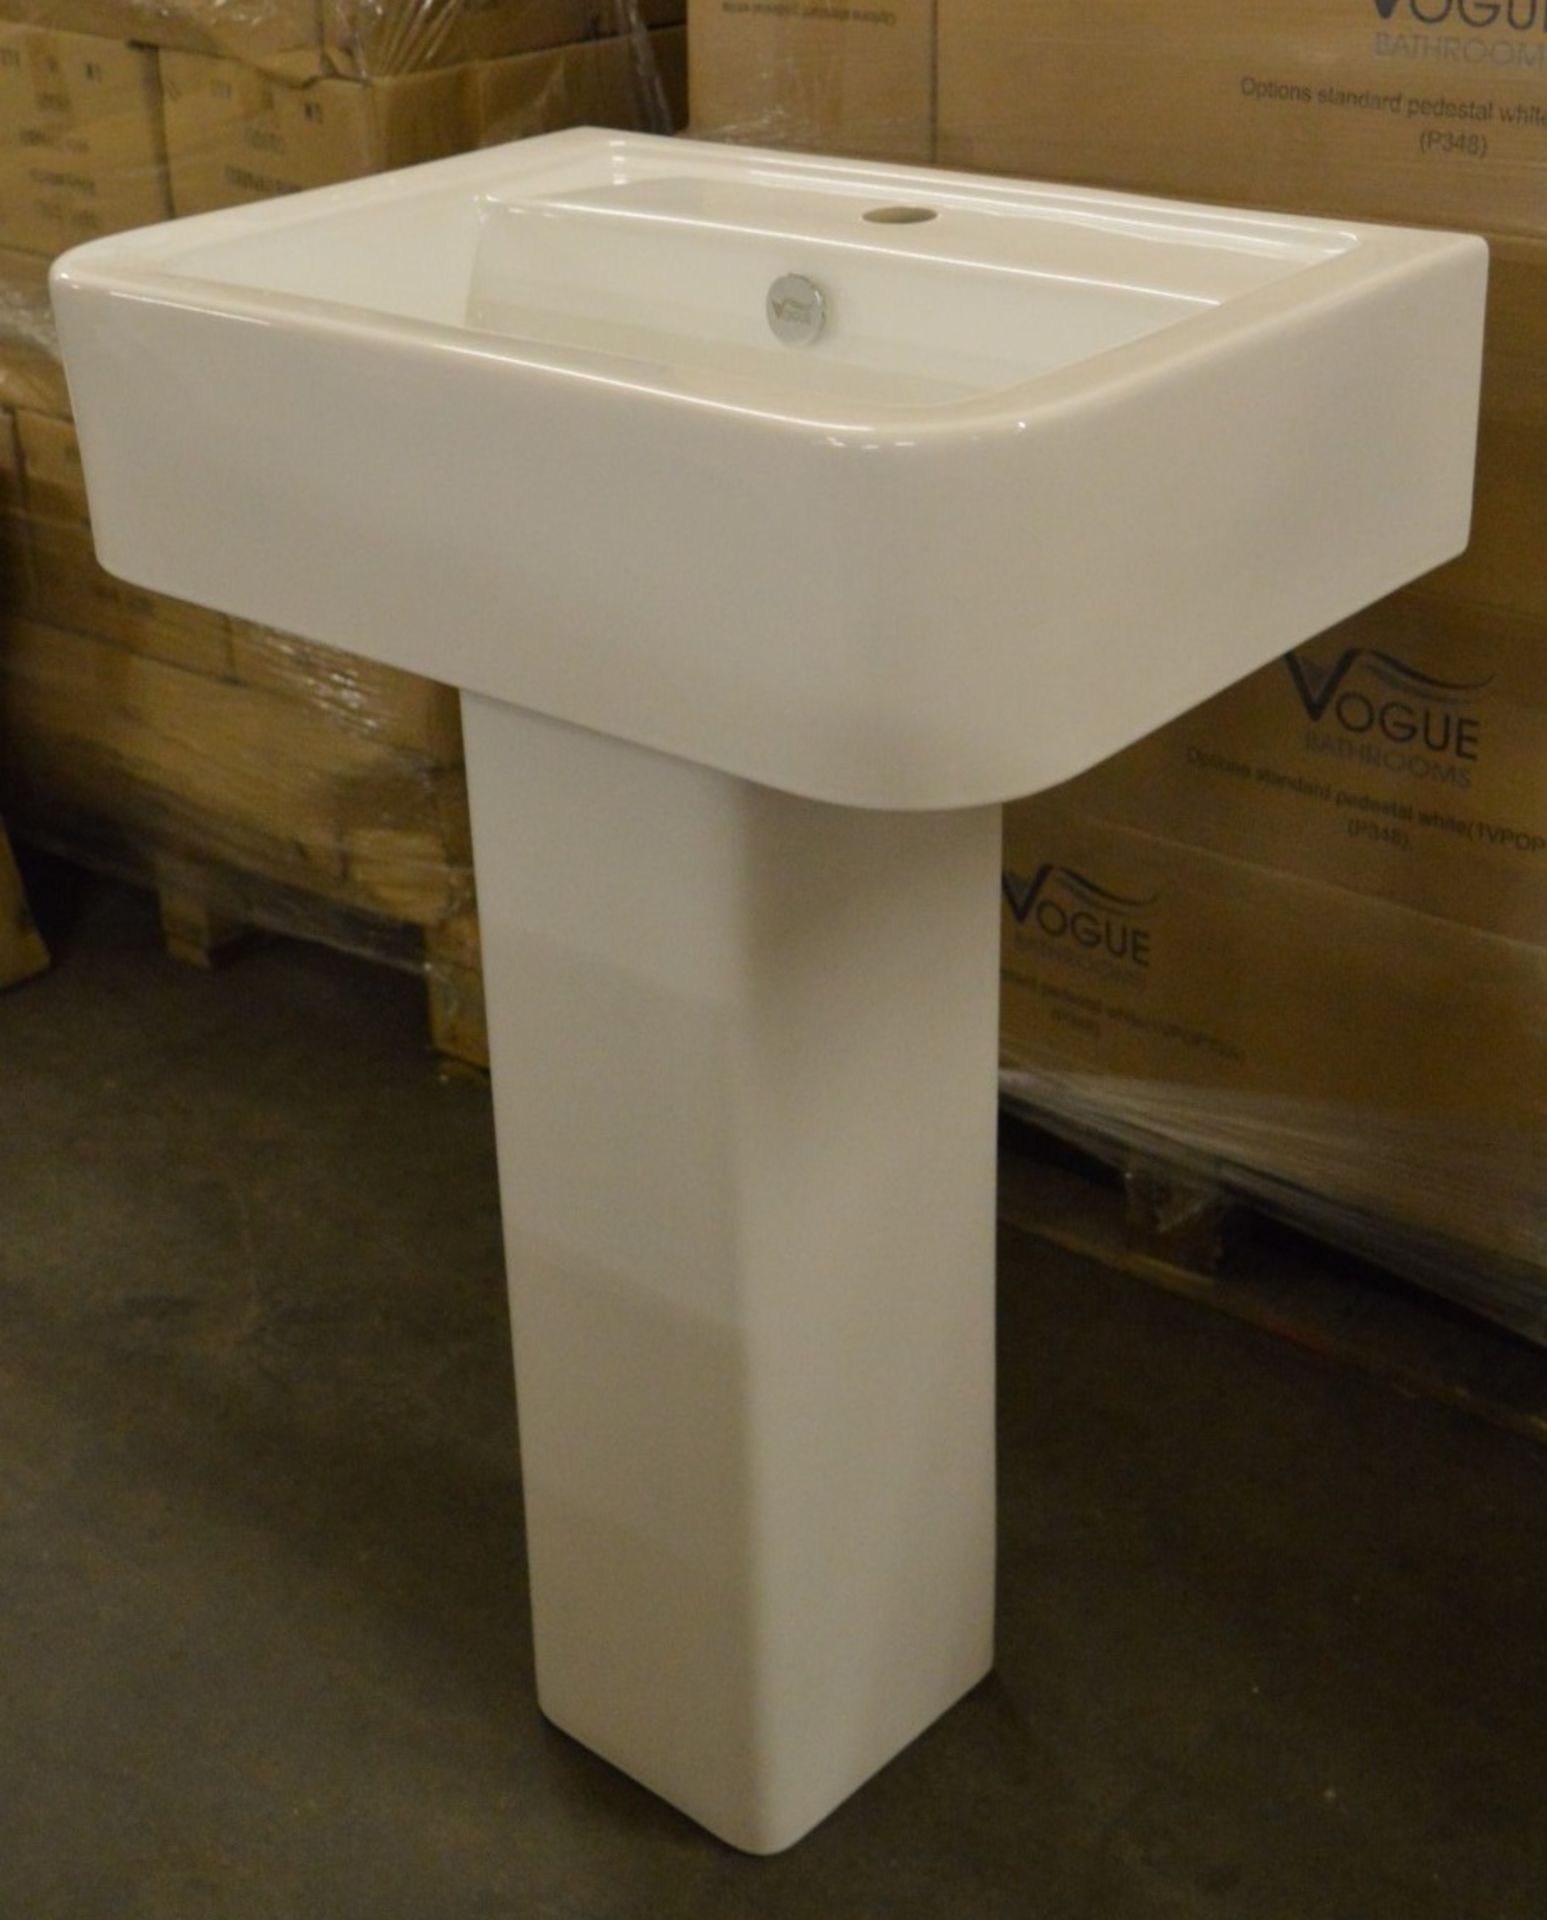 4 x Vogue Bathrooms OPTIONS Single Tap Hole SINK BASINS With Pedestals - 450mm Width - Brand New - Image 6 of 6